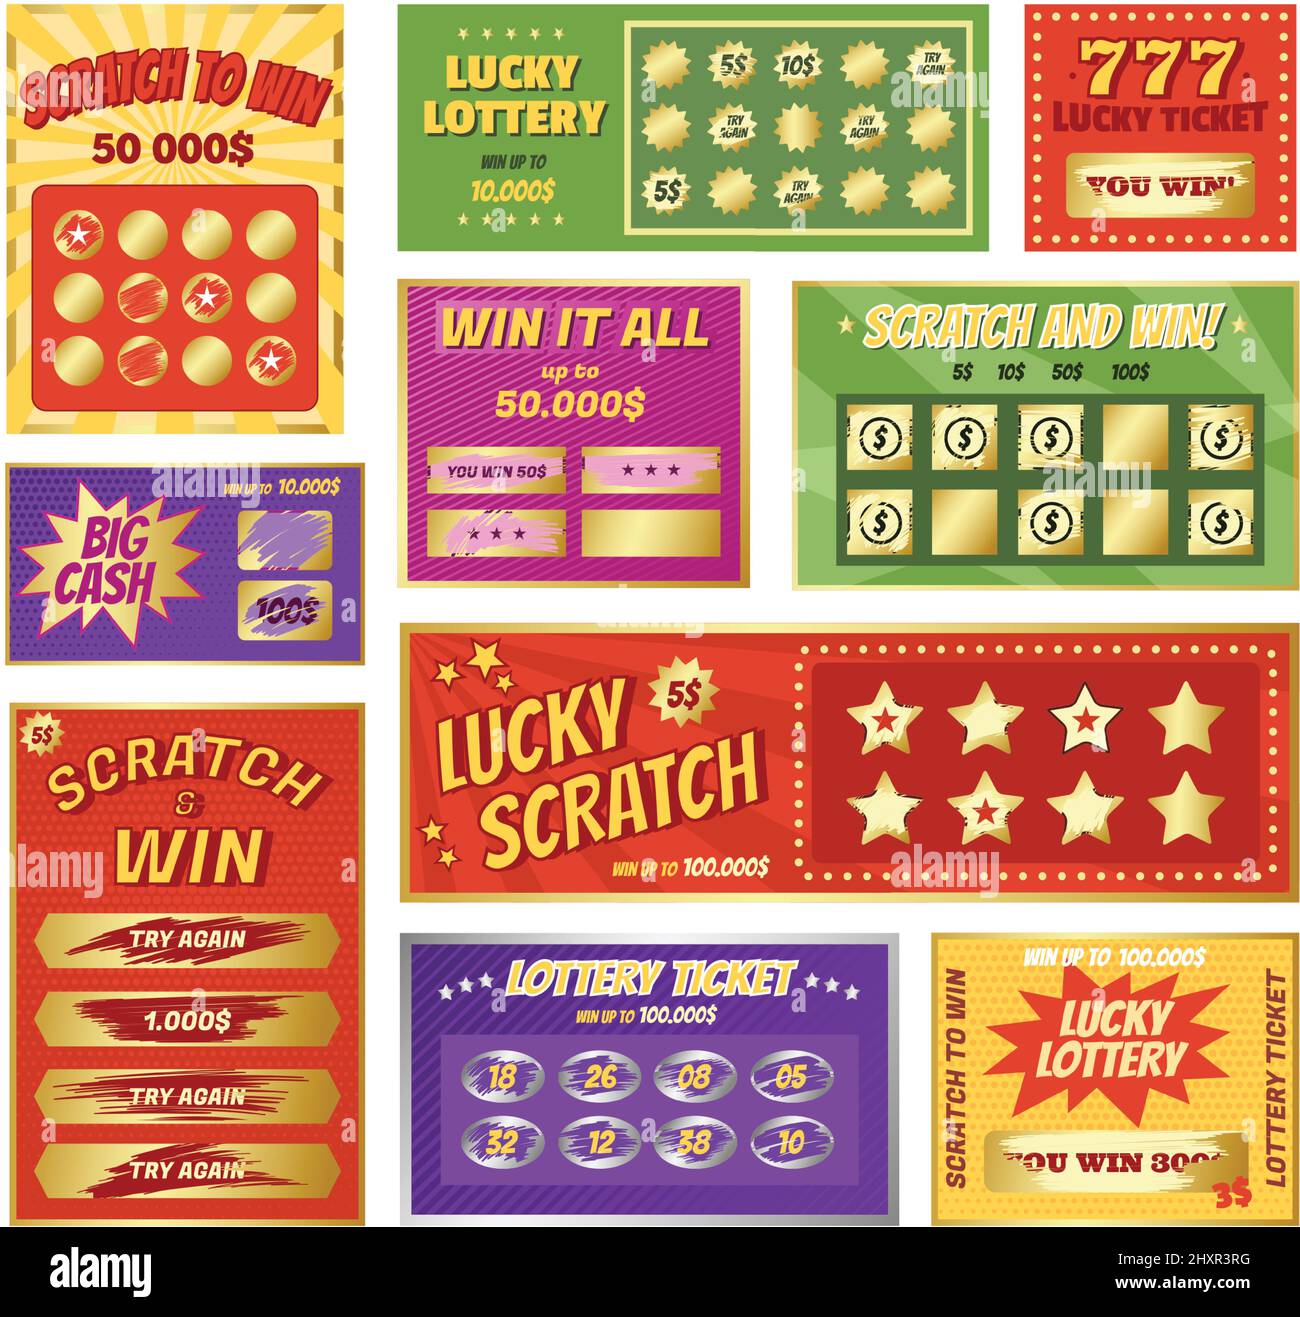 Scratch cards, instant lottery card, lucky jackpot winner tickets. Lotto and bingo game winning ticket, scratchcard games vector set. Gambling concept, coupons for prize or big cash win Stock Vector